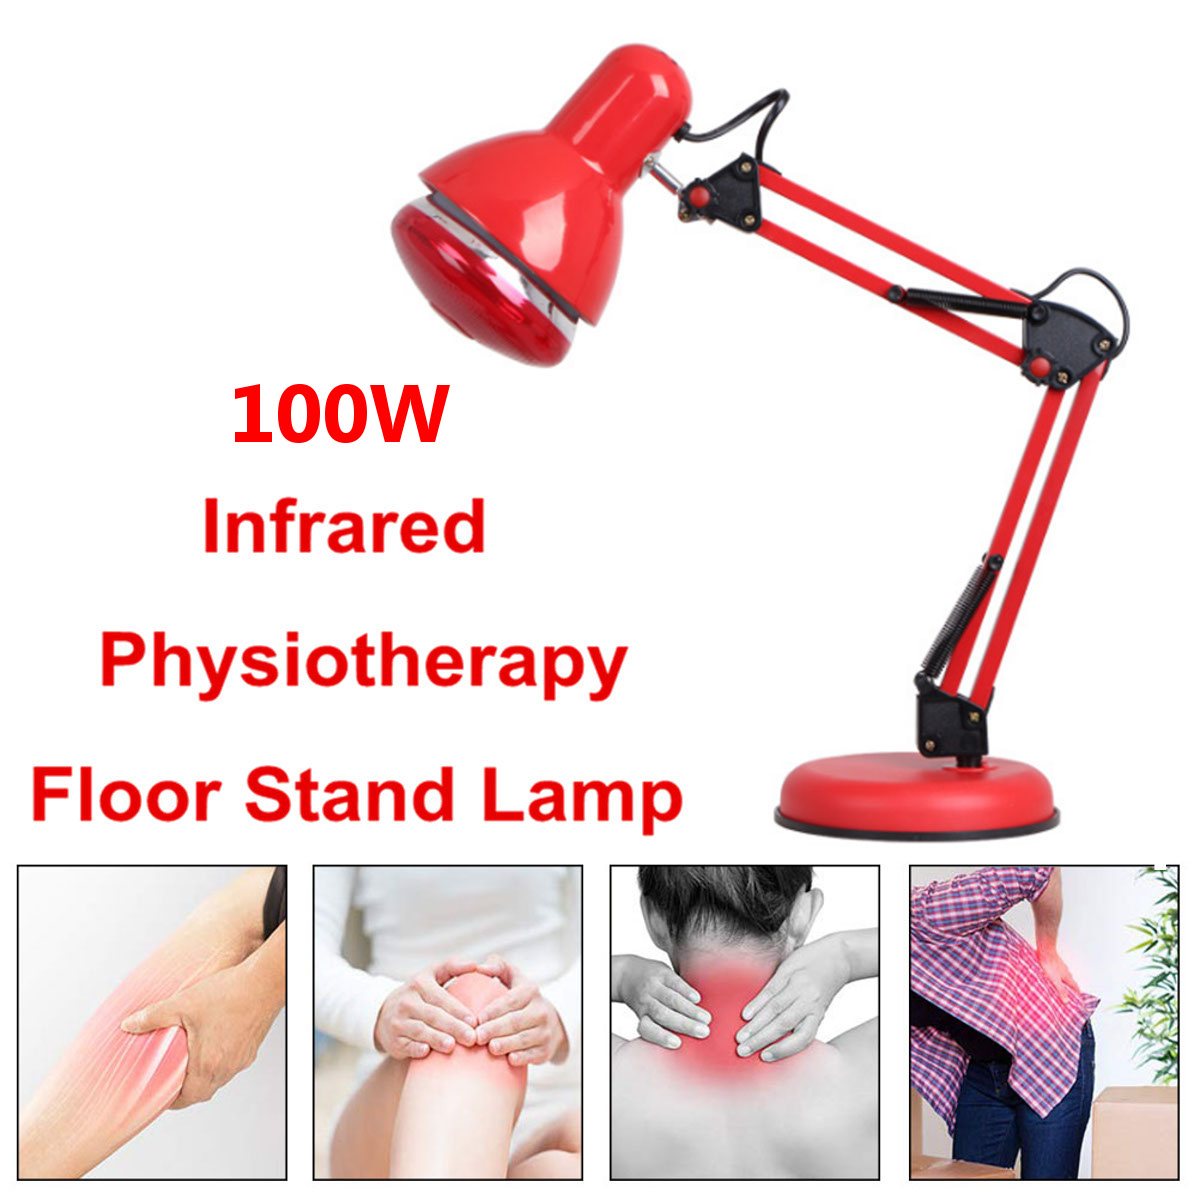 100W-Floor-Stand-Infrared-Therapy-Heat-Lamp-Health-Pain-Relief-Physiotherapy-1776812-2